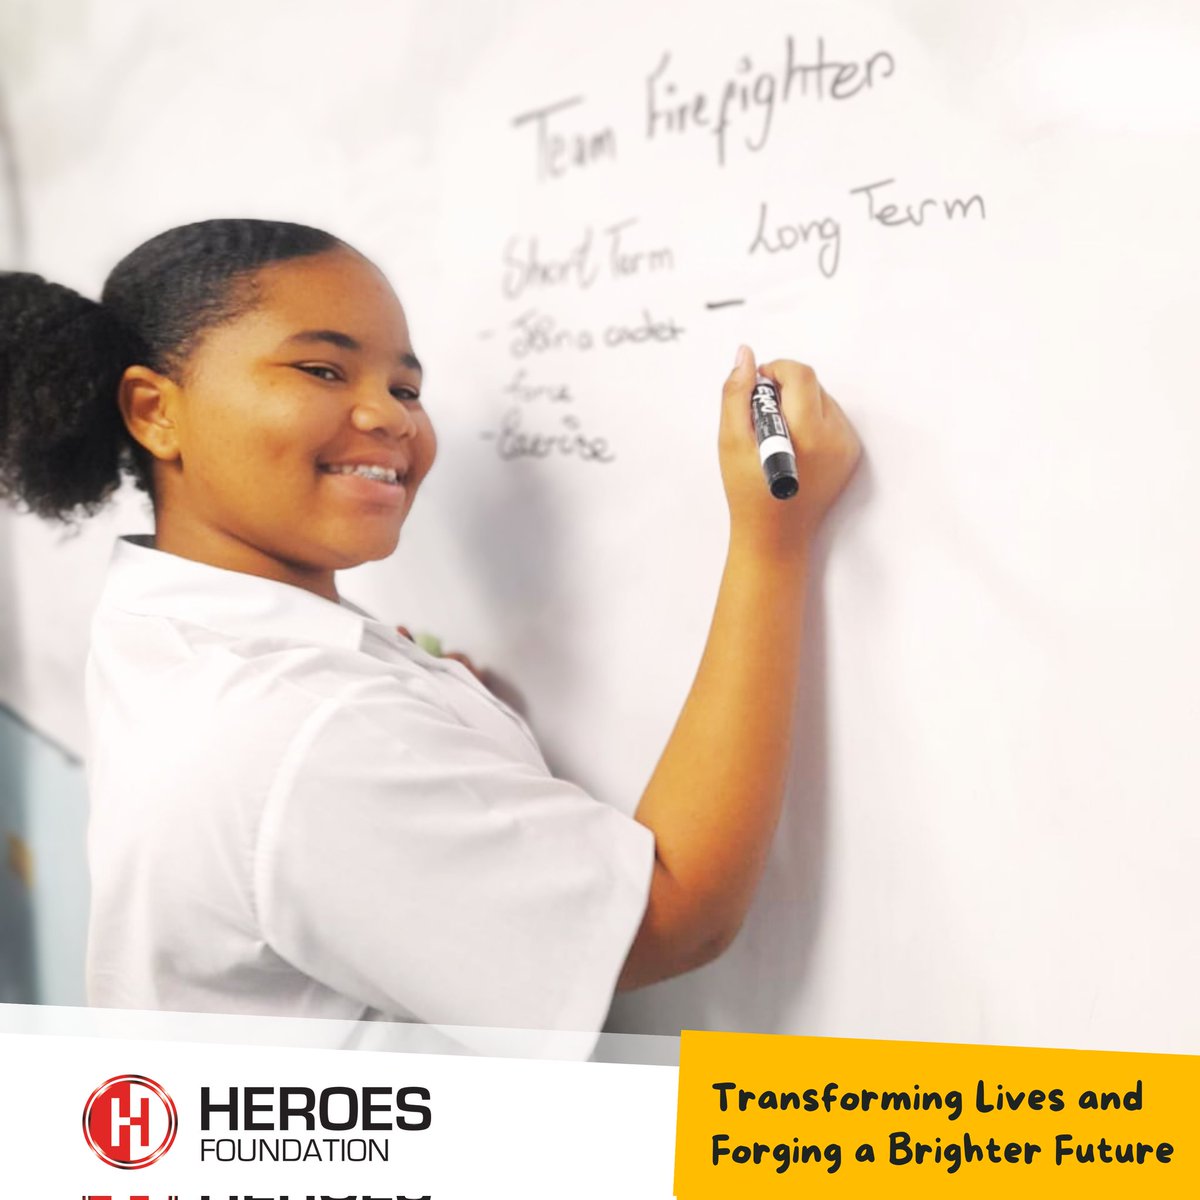 Meet Aasia, a 14-year-old student at the Woodbrook Secondary School who wants to be a firefighter!  

She’s setting SMART short-term and long-term goals to turn this dream into a reality. 

Building a brighter future means laying a solid foundation today.  

#TogetherWeAchieve